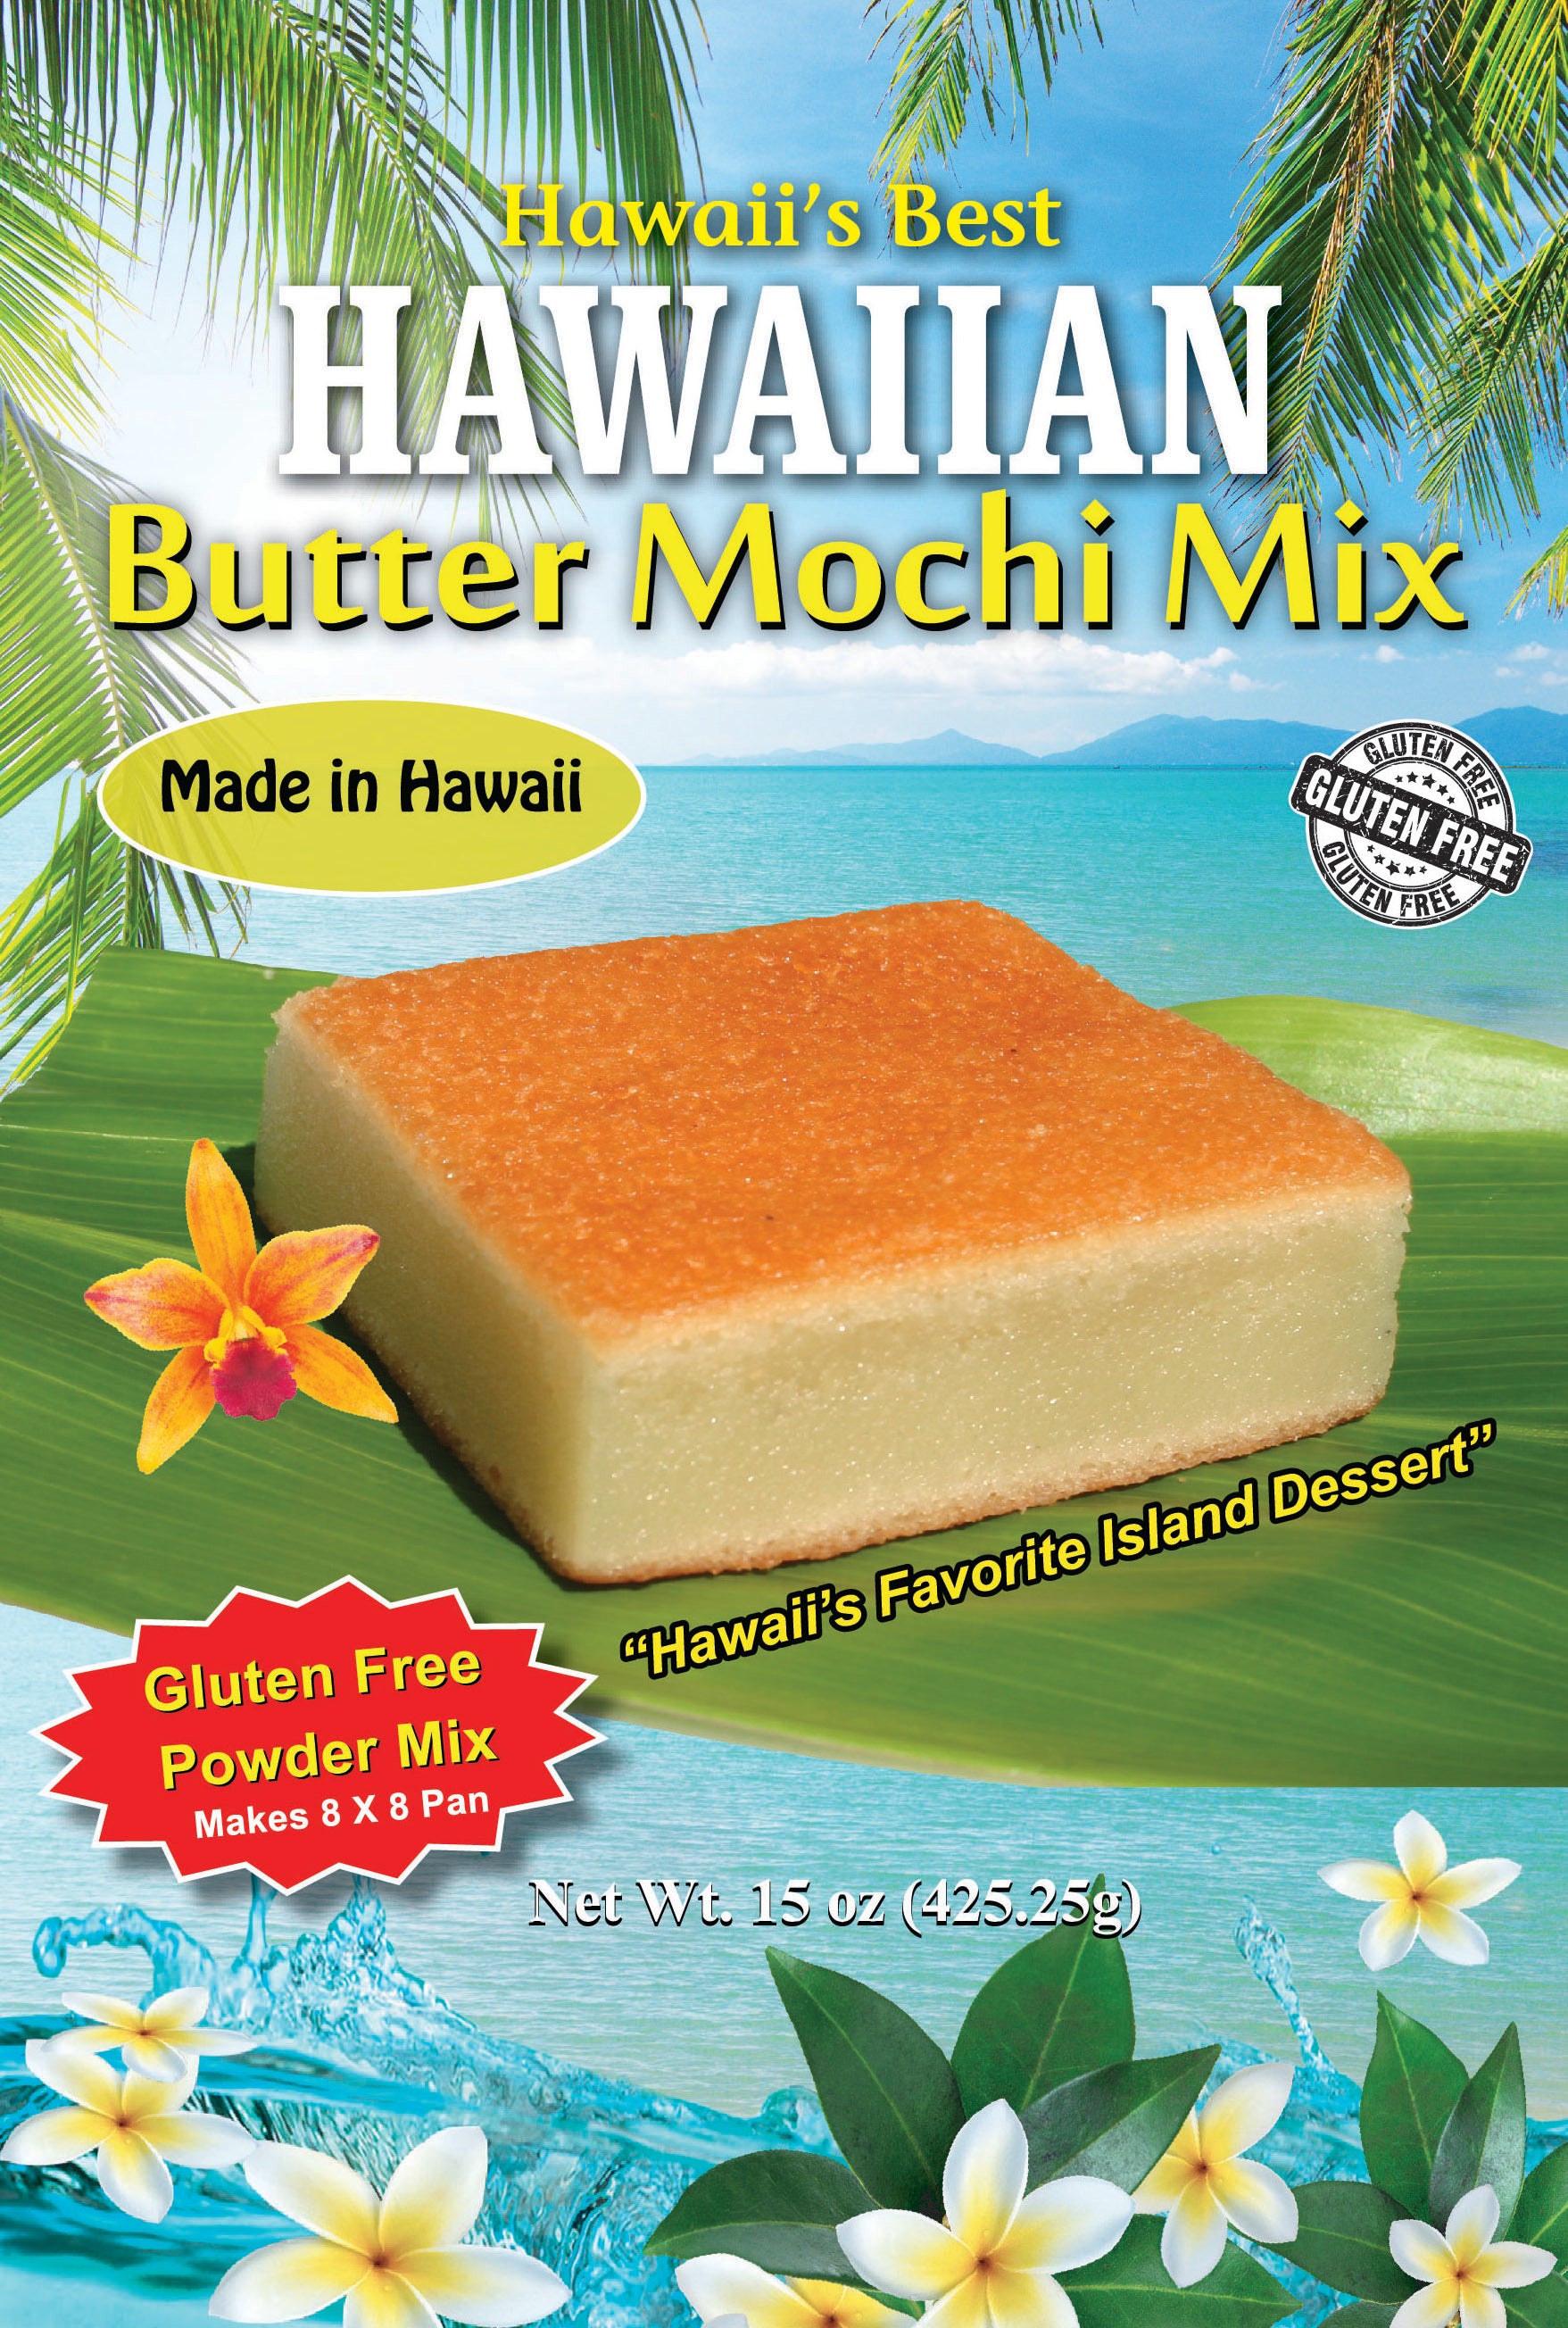 Free Shipping! (10 BAGS - EXTRA VALUE PACK, $5.49 EACH) BUTTER MOCHI MIX